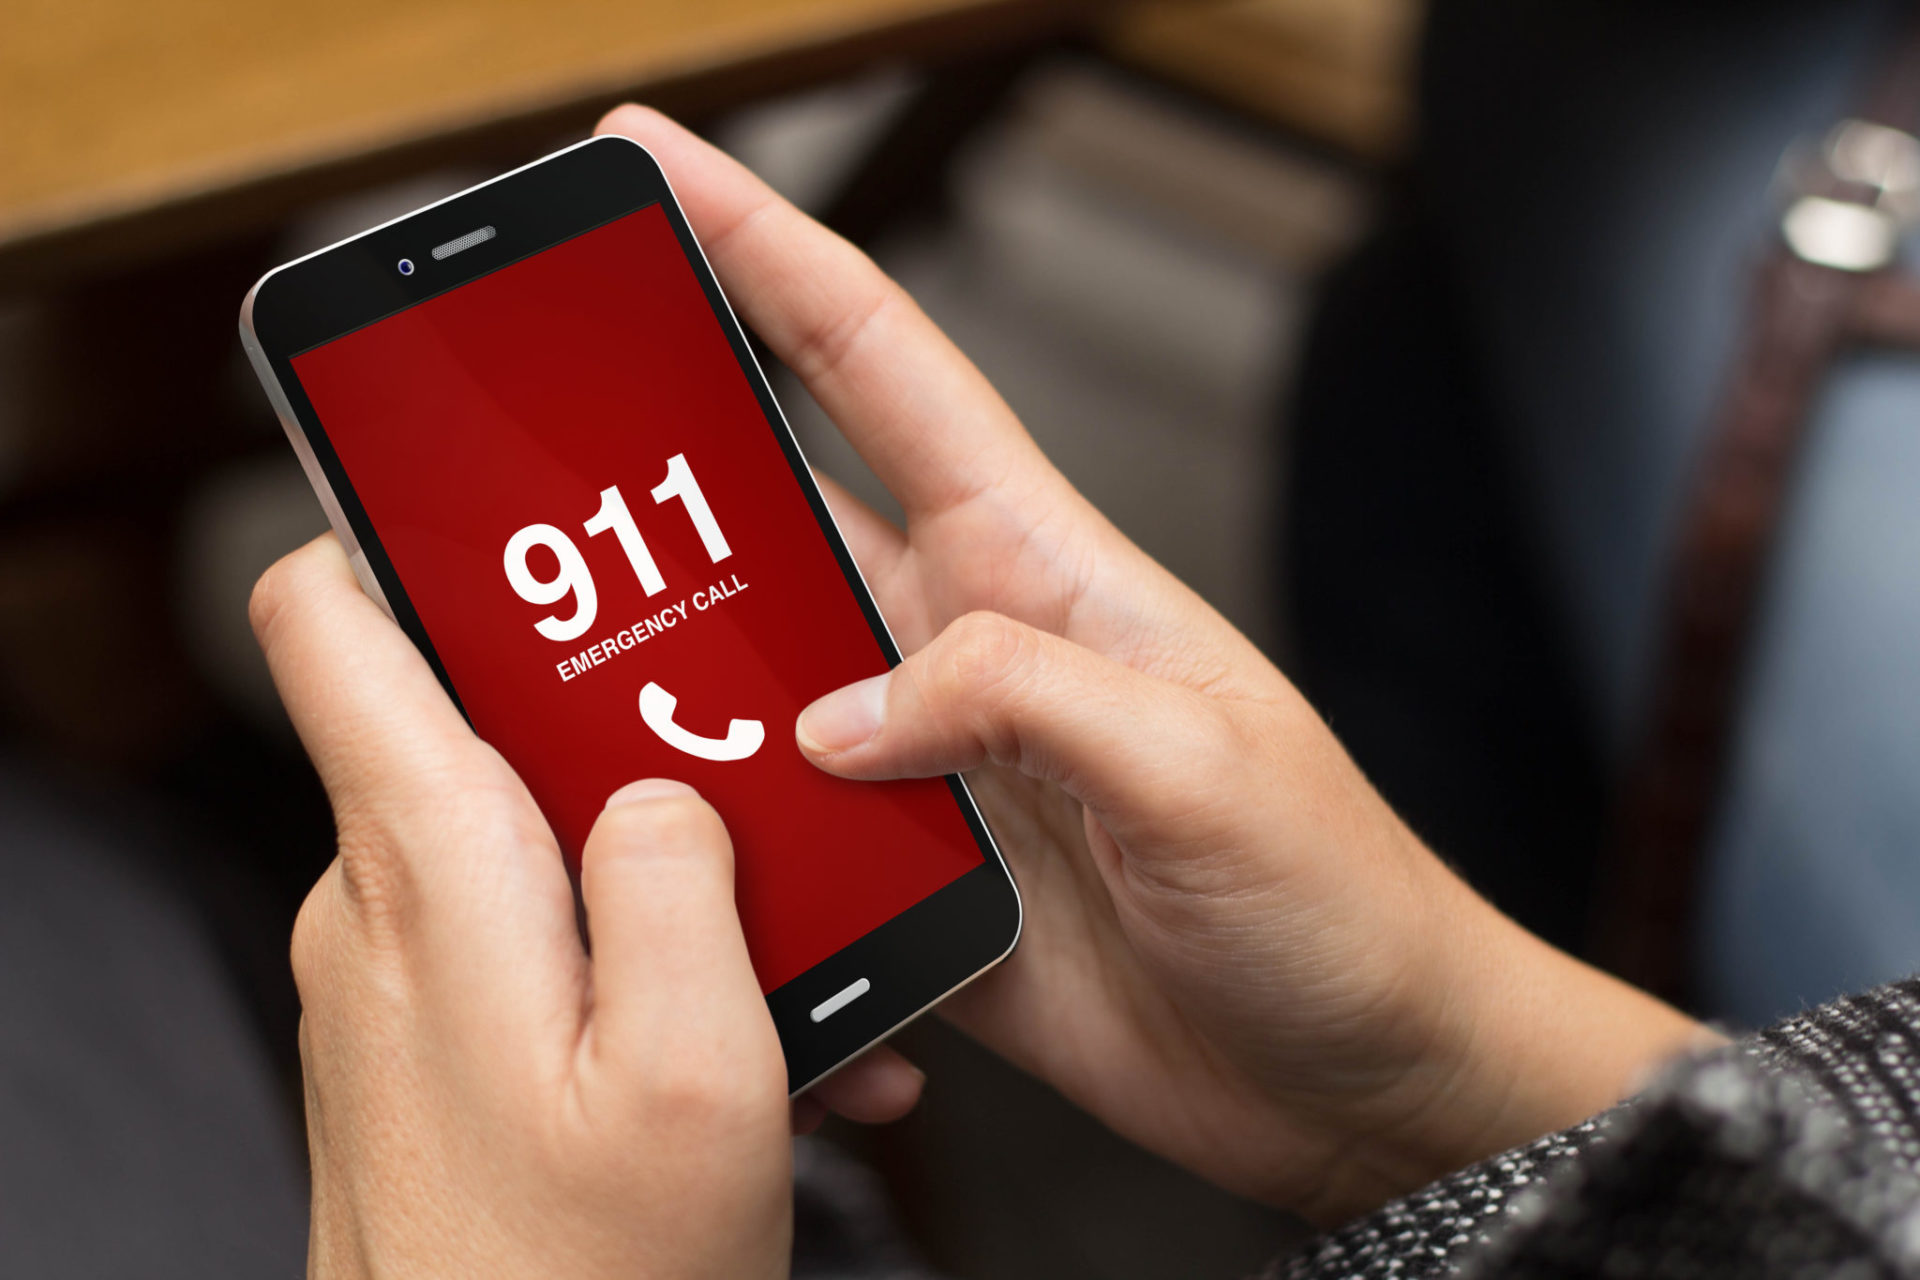 How Kent Works: When to call 911 versus calling the non-emergency number.